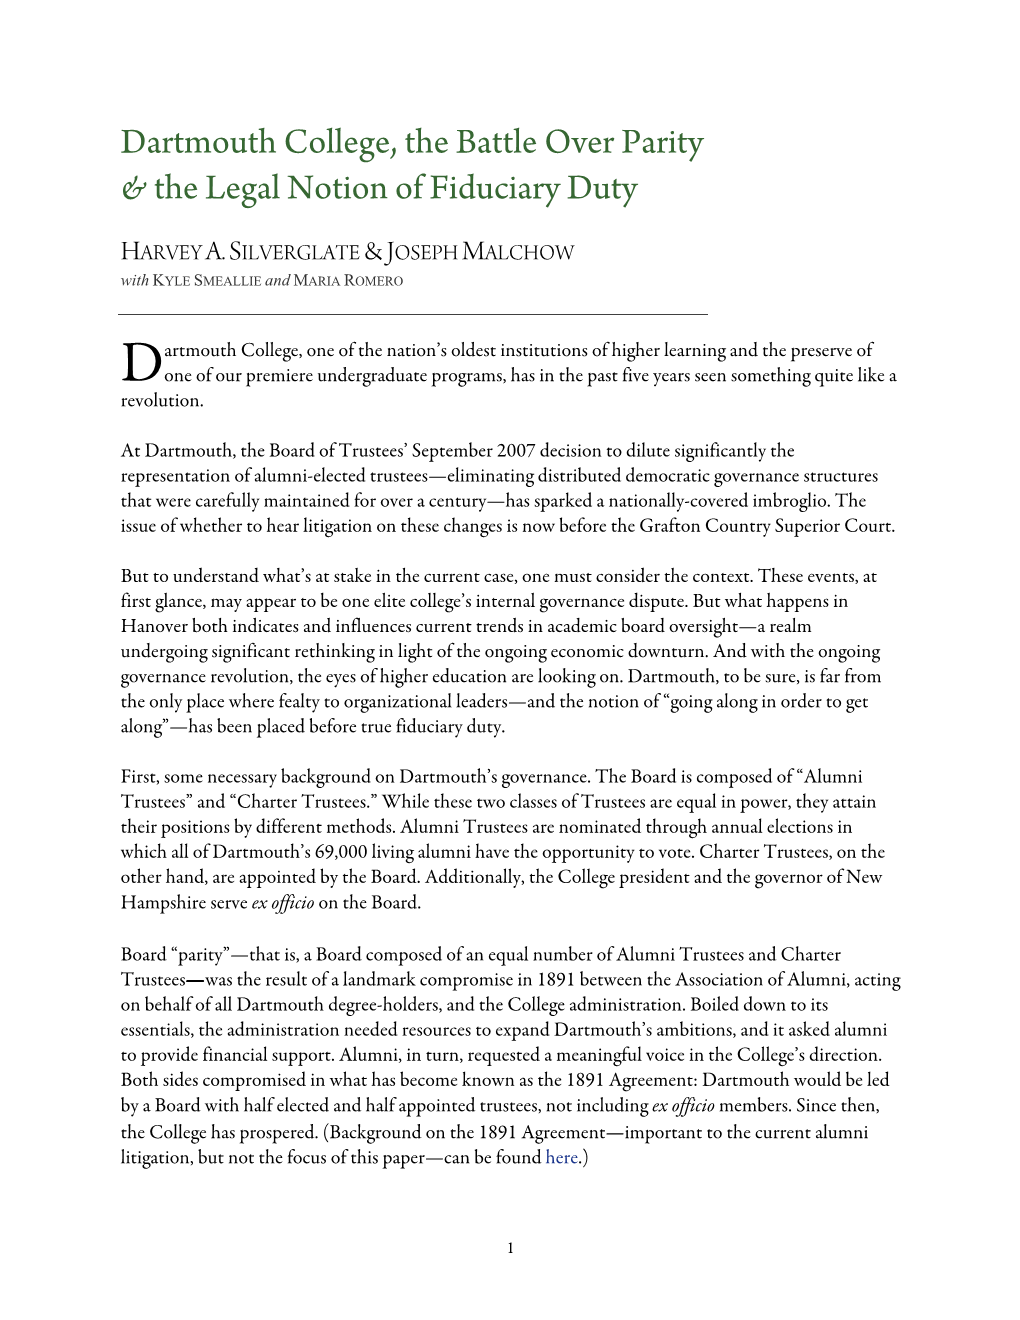 Dartmouth College, the Battle Over Parity & the Legal Notion Of